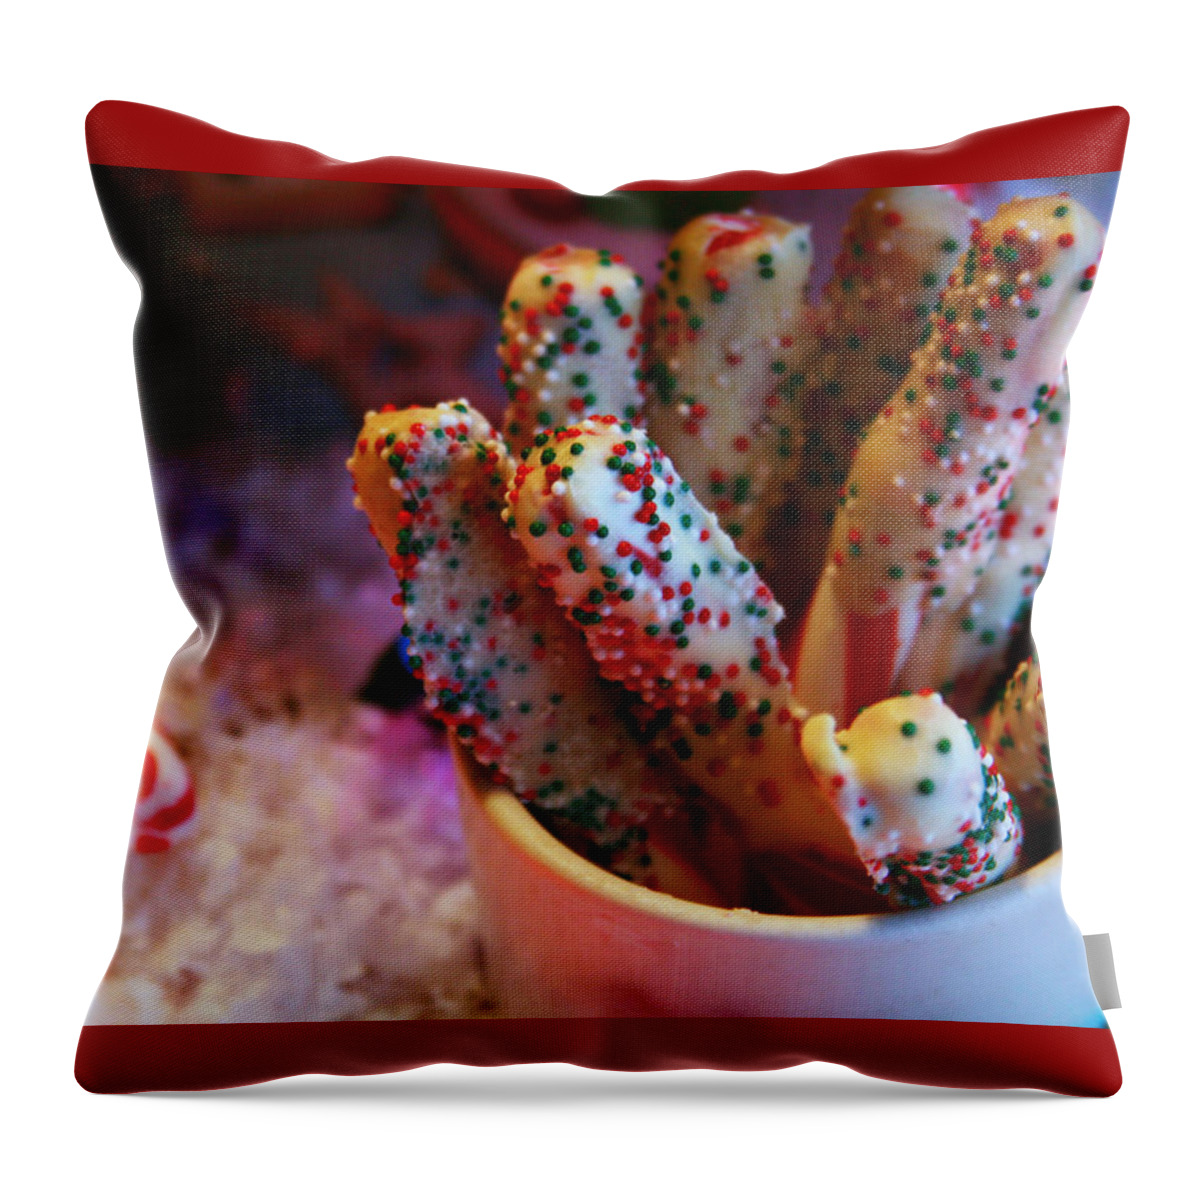 Christmas Throw Pillow featuring the photograph Peppermint Yum by Toni Hopper